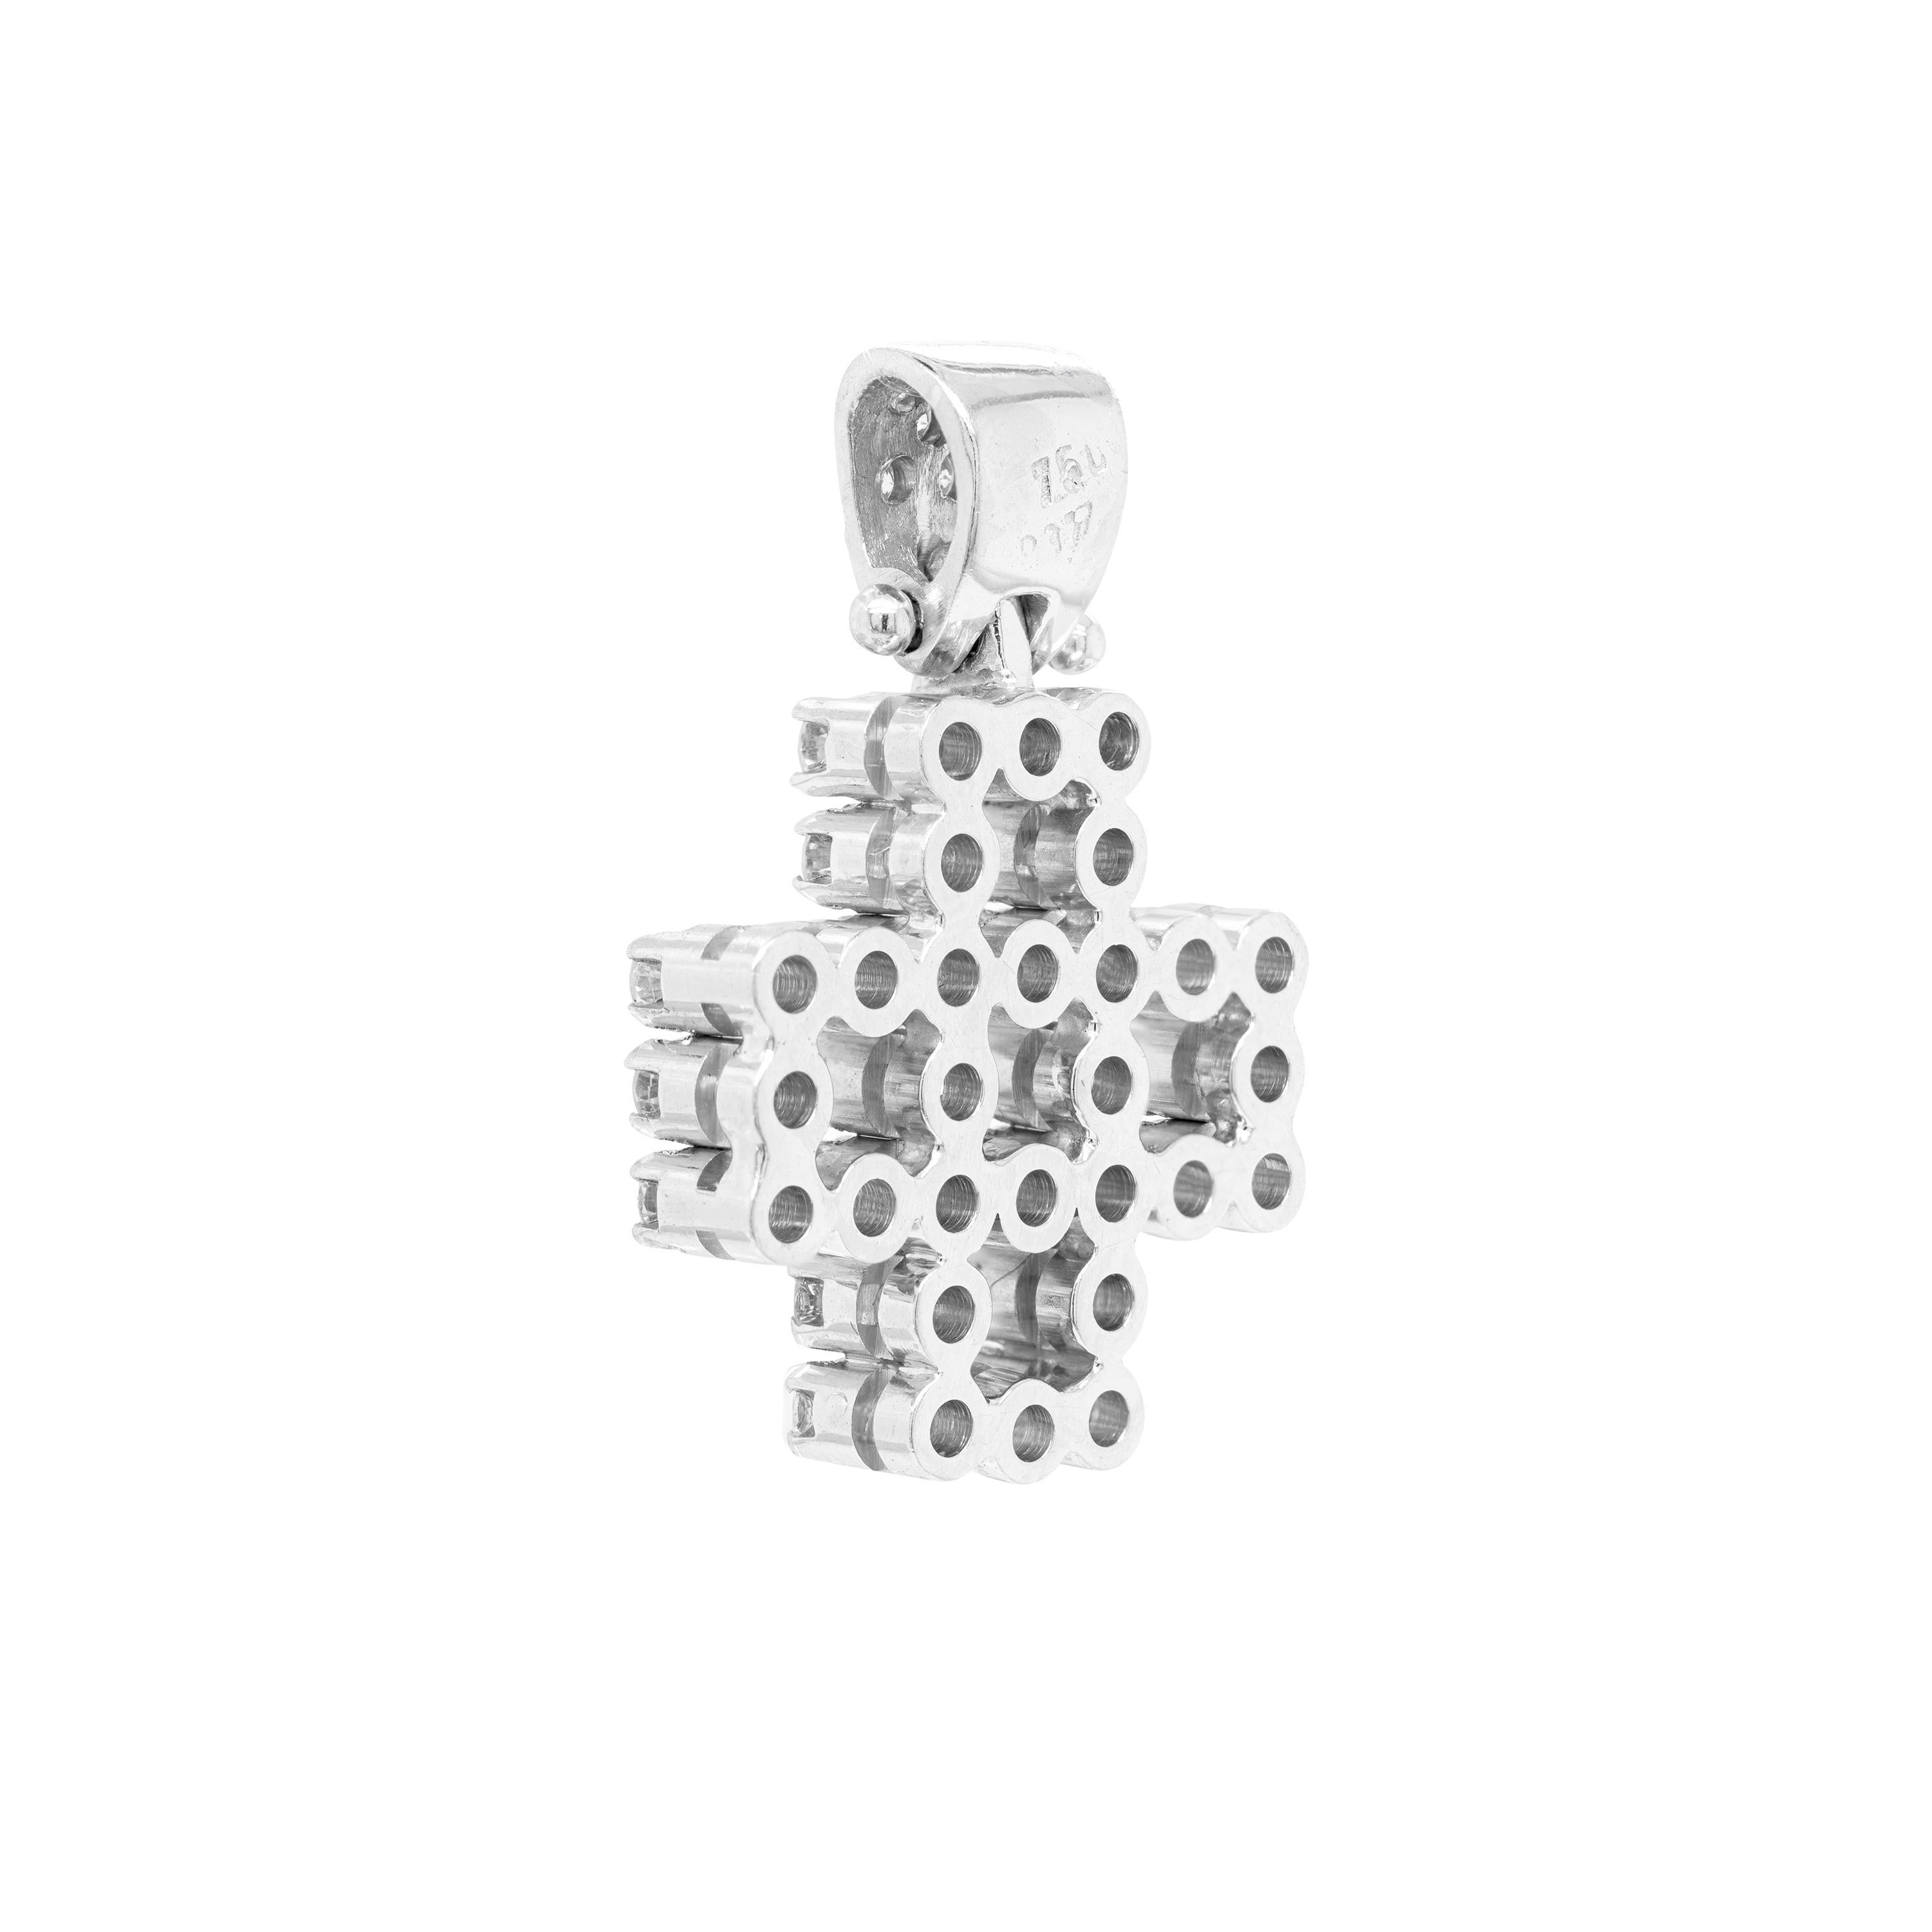 This wonderful square cross pendant features a marvellous open work design beautifully decorated with 28 fine quality round brilliant cut diamonds, all claw set in 18 carat white gold open back settings. A hinged wide bale, also decorated with round